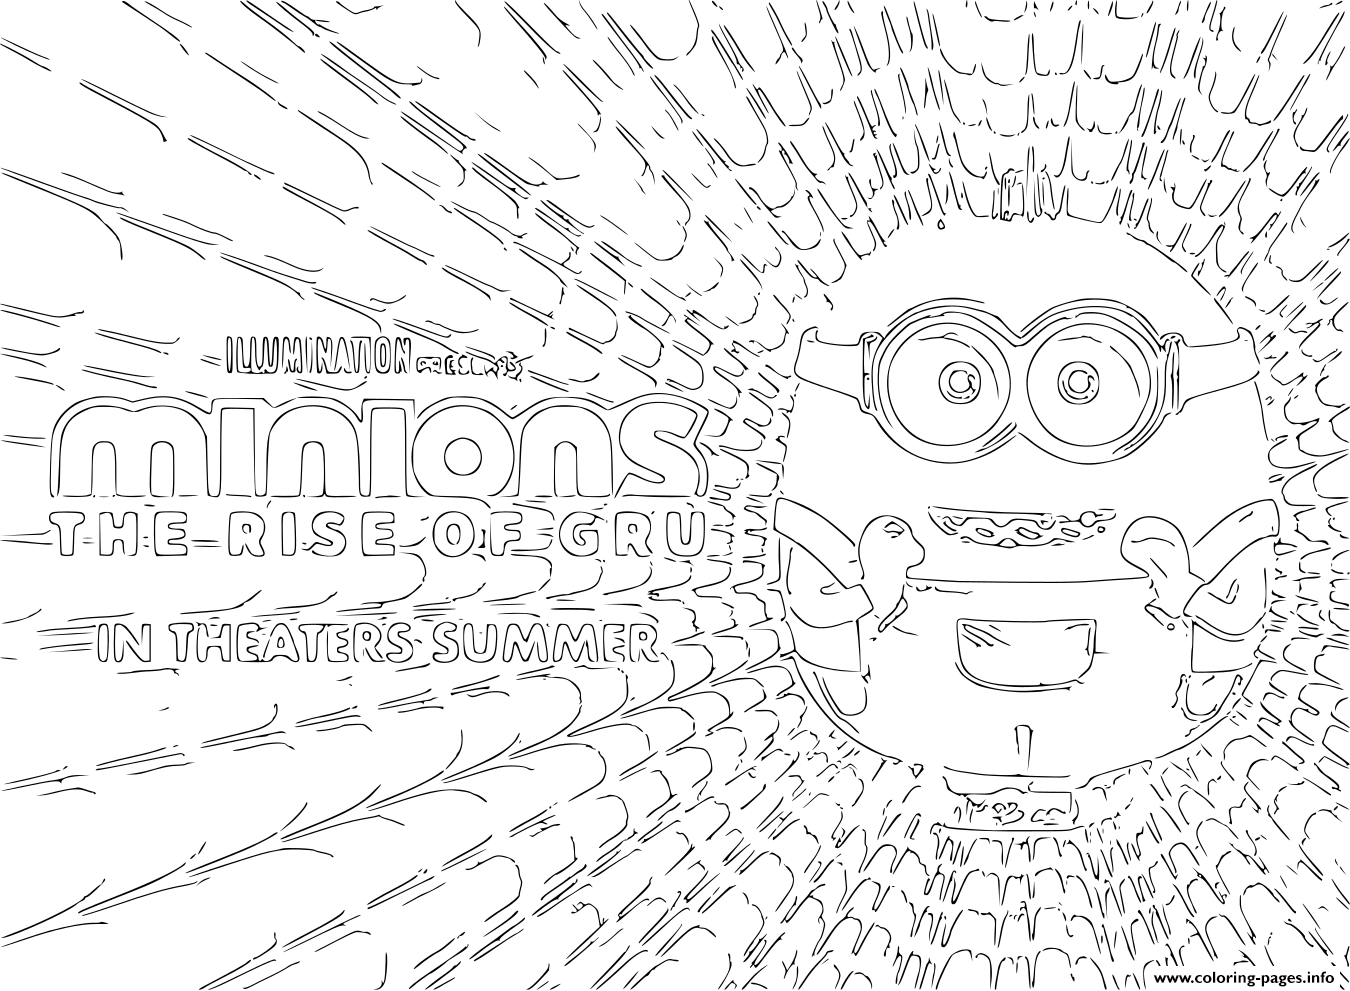 Minions 2 The Rise Of Gru Summer 2021 coloring